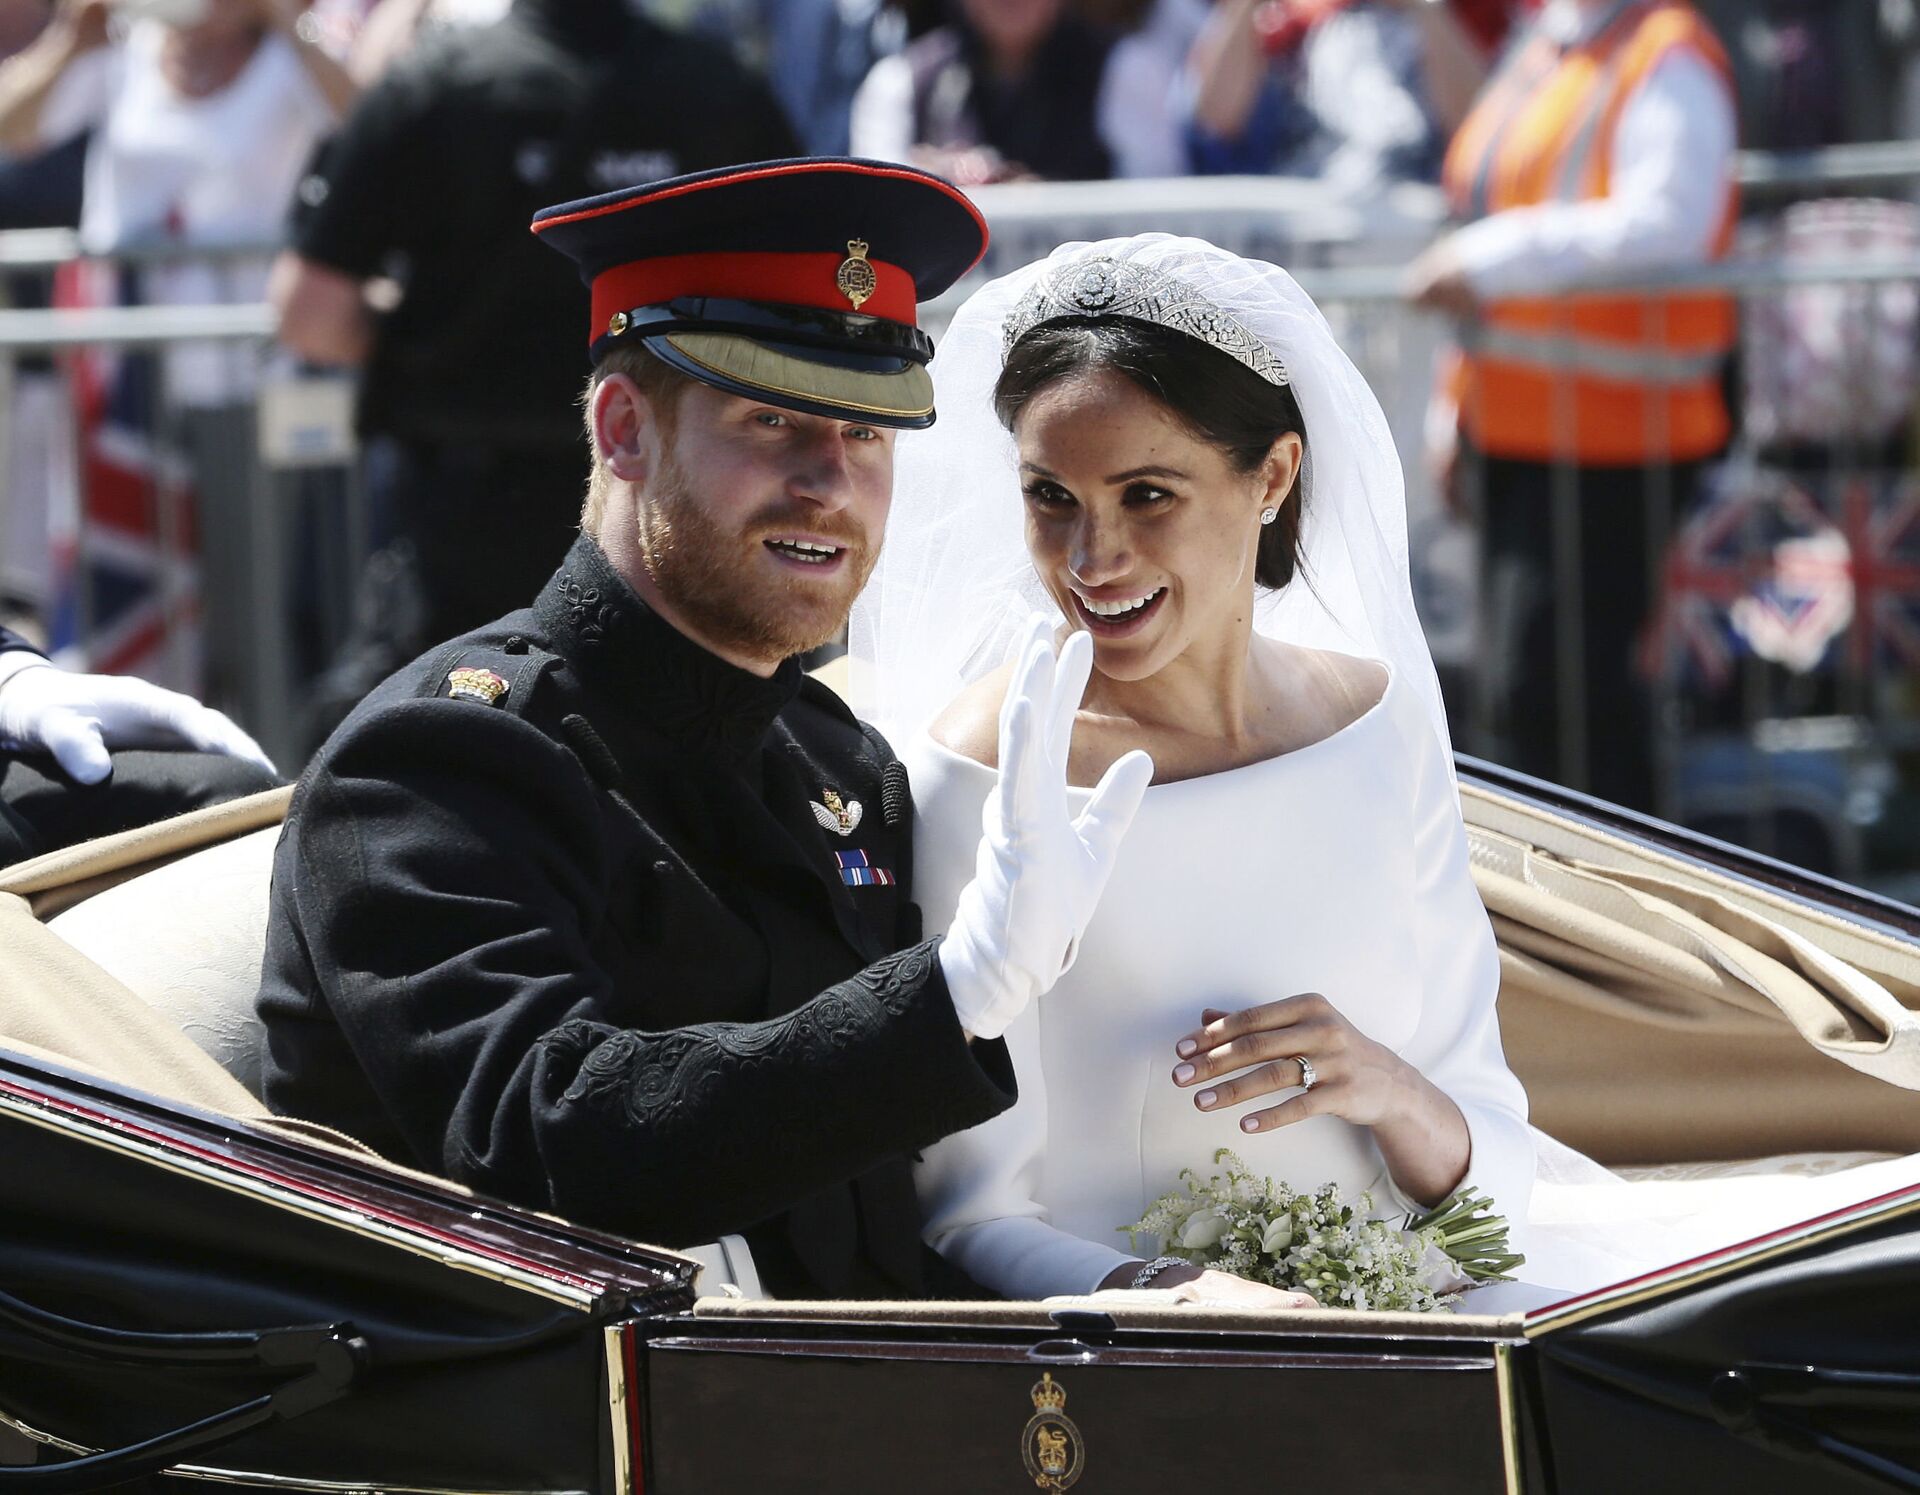 Britain's Prince Harry and Meghan Markle ride in an open-topped carriage after their wedding ceremony at St. George's Chapel in Windsor Castle in Windsor, near London, England, Saturday, May 19, 2018 - Sputnik International, 1920, 05.10.2021